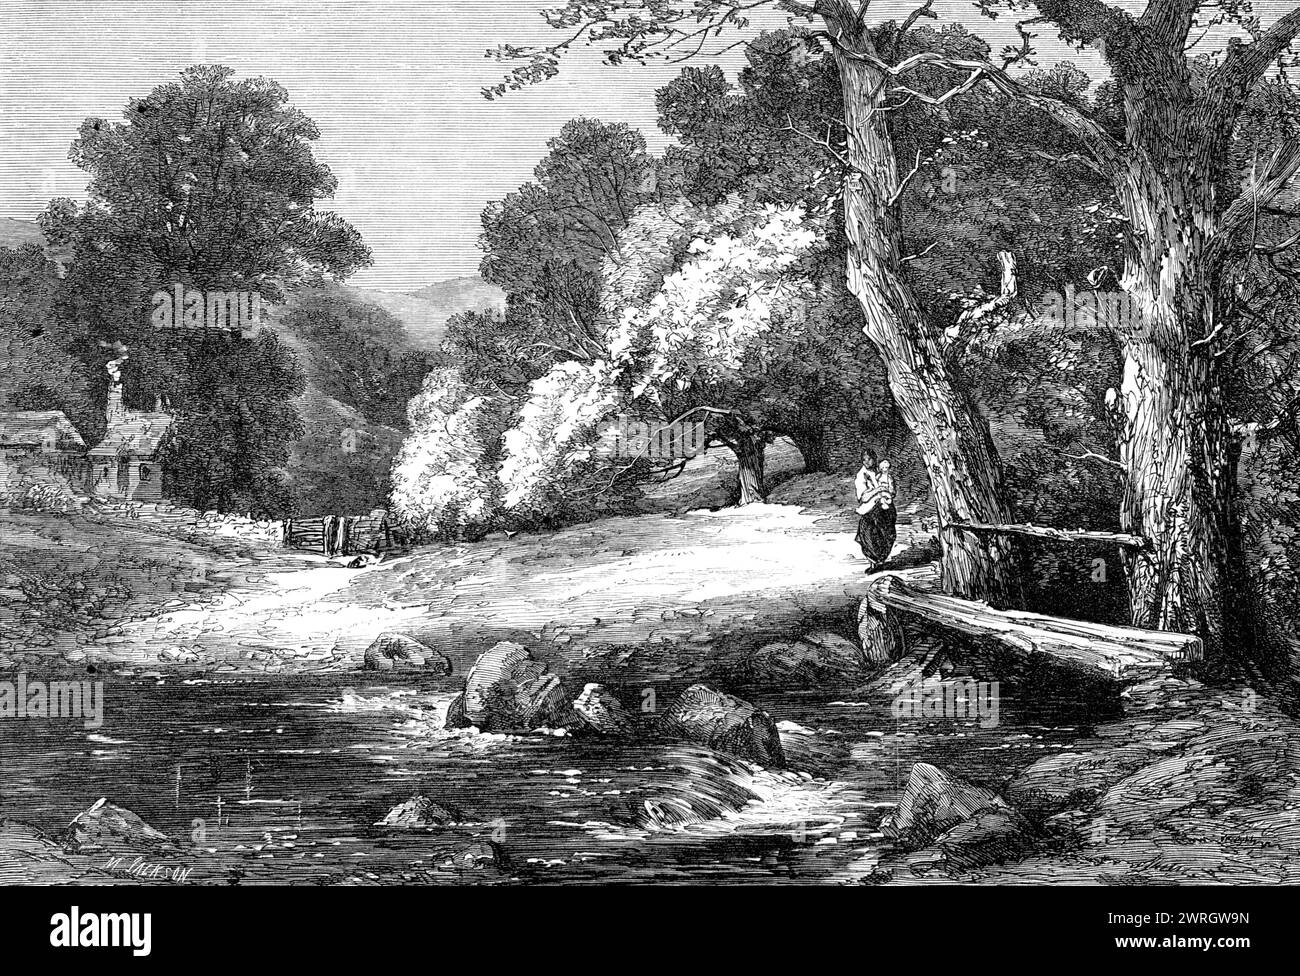 &quot;The Combe Farm,&quot; by G. Chester, in the Royal Academy Exhibition, 1864. Engraving of a painting. The &quot;Combe,&quot; which is the subject of the admirably-painted landscape by Mr. George Chester (senior)...is...[in] Somersetshire...Its features are all familiar - the comfortable farmstead, which is the retreat of the true &quot;sons of the soil,&quot; and the scene of, comparatively, still primitive and unsophisticated life. It is embosomed and almost hid among fine old elms, oaks, and other trees; sheltered by the woodland and the easy, graceful, slopes of swelling hills, which s Stock Photo